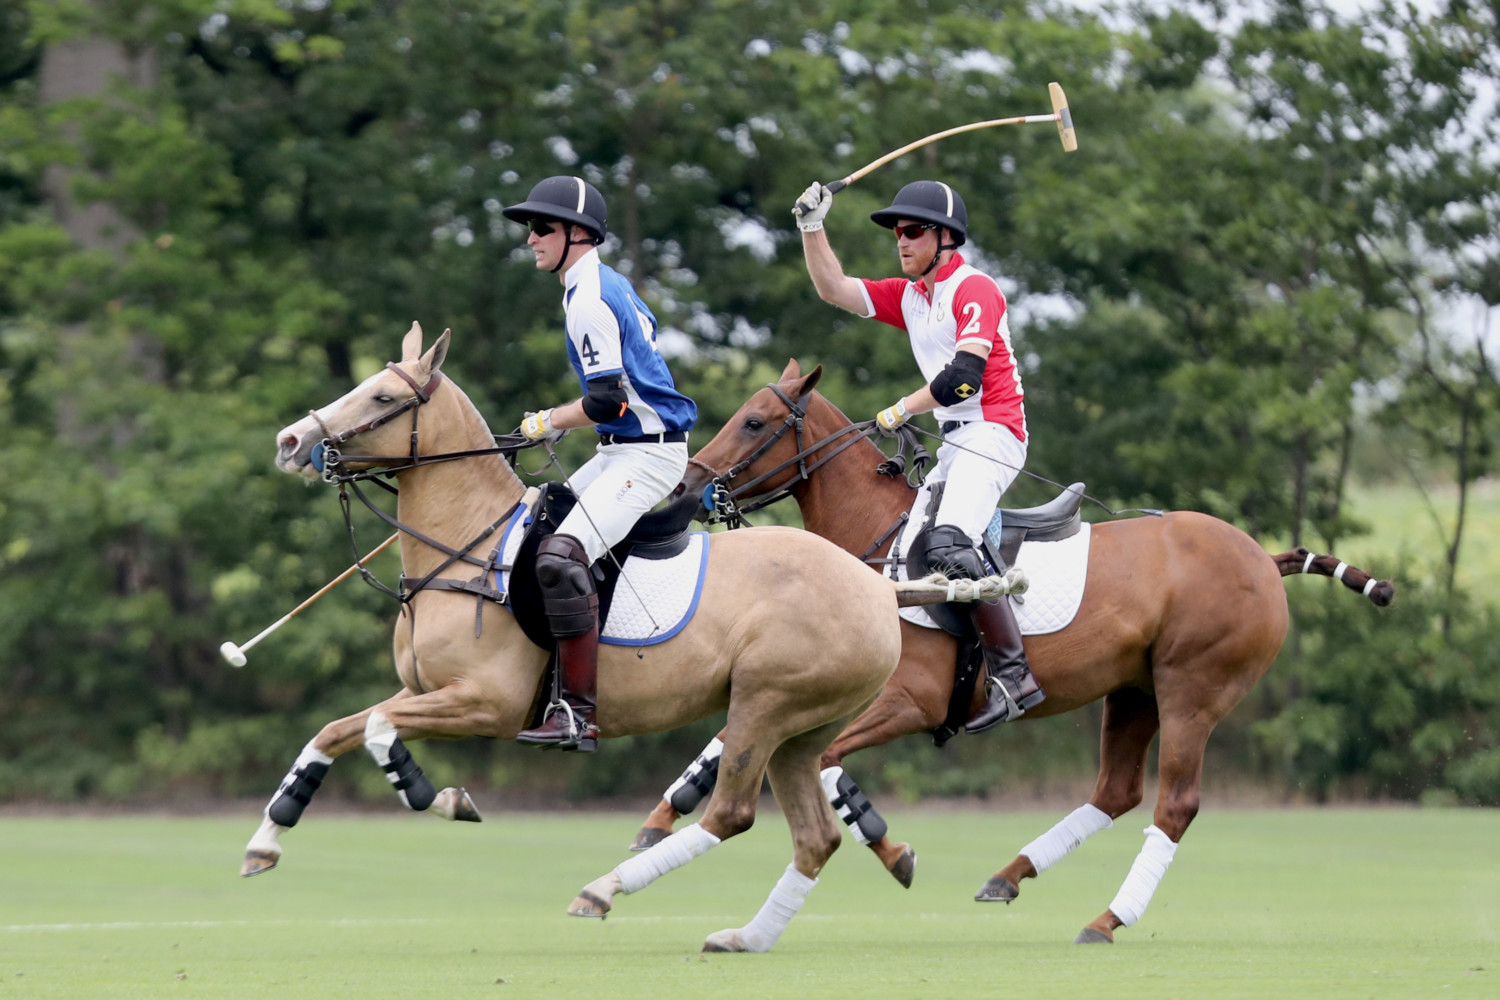 WOKINGHAM, ENGLAND - JULY 10: Prince William, Duke of Cambridge and Prince Harry, Duke of Sussex compete during the King Power Royal Charity Polo Day for the Vichai Srivaddhanaprabha Memorial Trophy at Billingbear Polo Club on July 10, 2019 in Wokingham, England. (Photo by Chris Jackson/Getty Images for The King Power Royal Charity Polo )